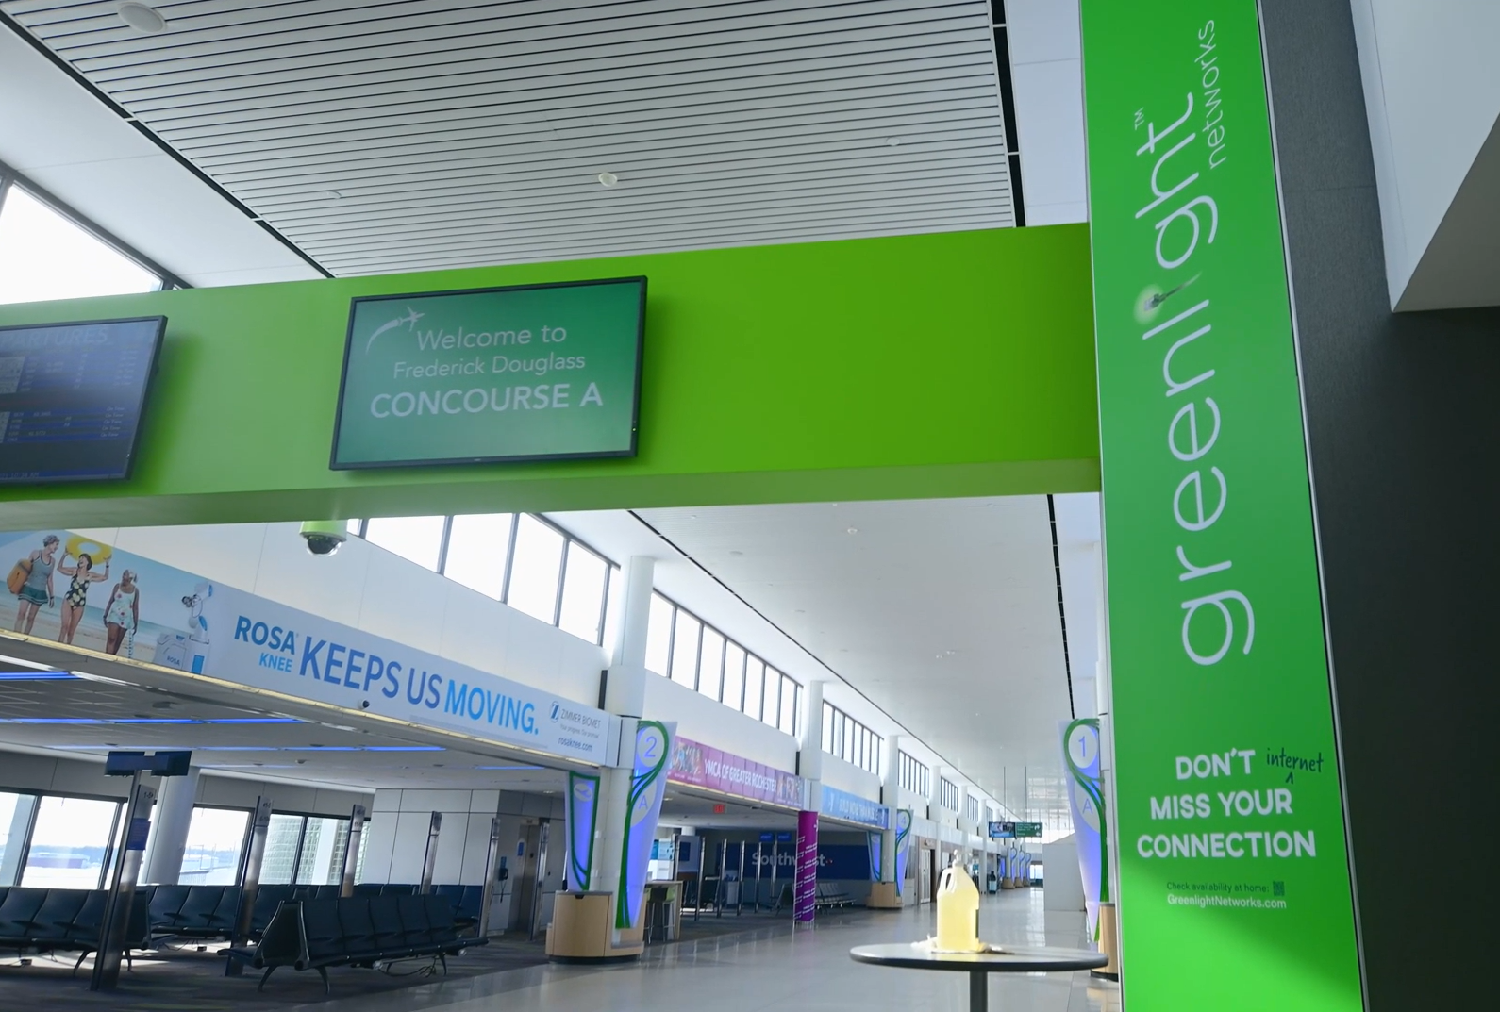 Greenlight Networks is proud to be the Internet Provider of the Rochester Airport.